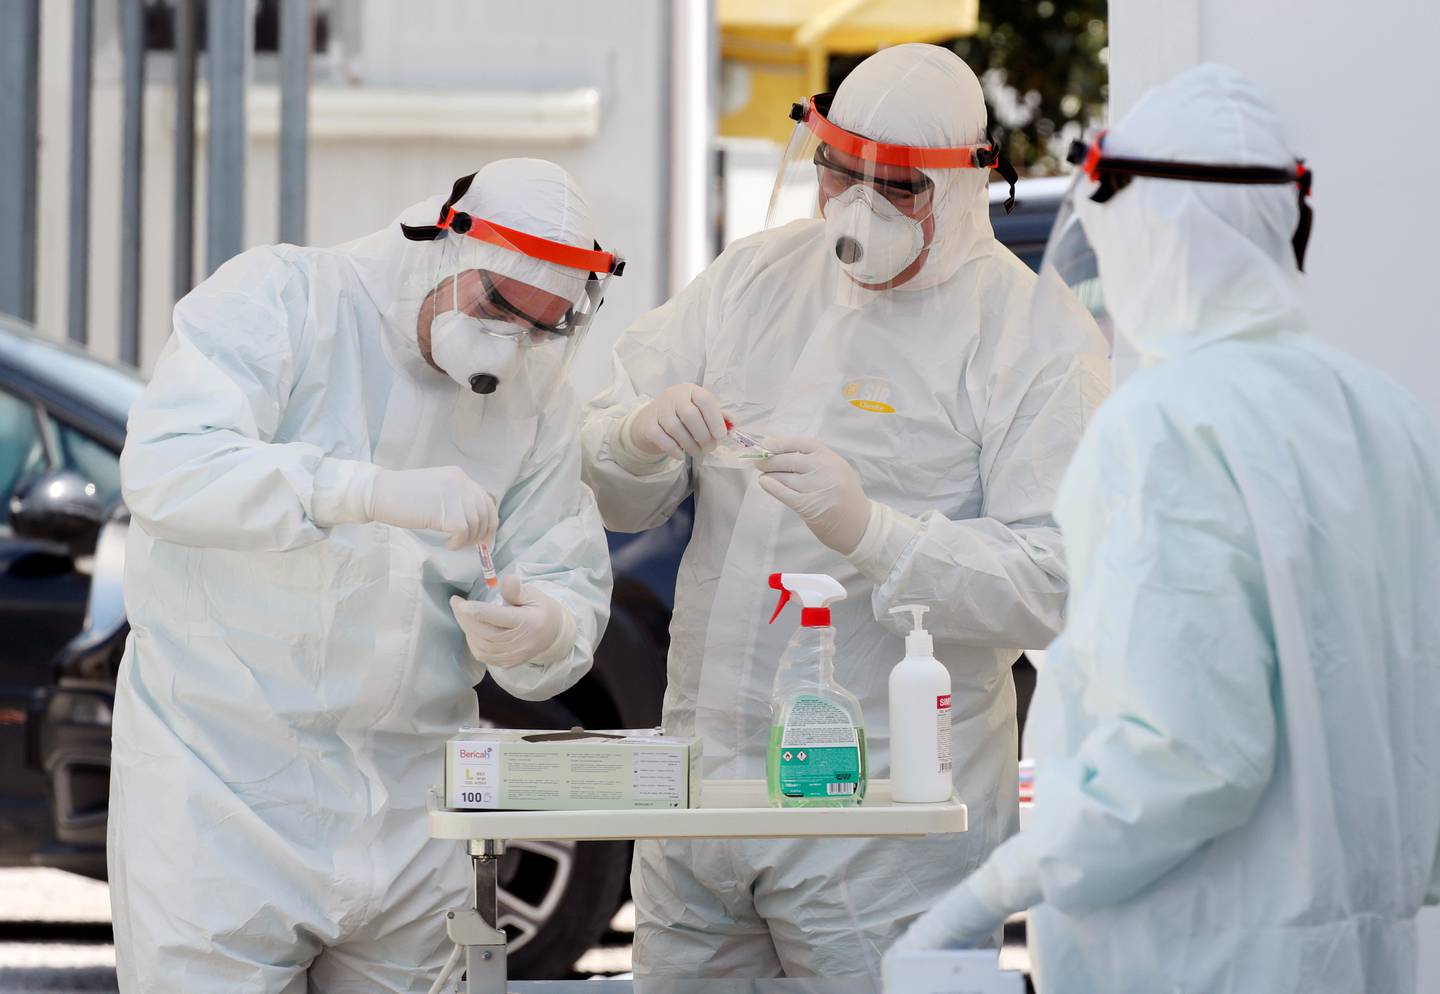 Health workers wearing protective gears keep swabs in tubes taken from drivers, as the spread of coronavirus disease (COVID-19) continues, in Giugliano in Campania, Italy, April 6, 2020. REUTERS/Ciro De Luca